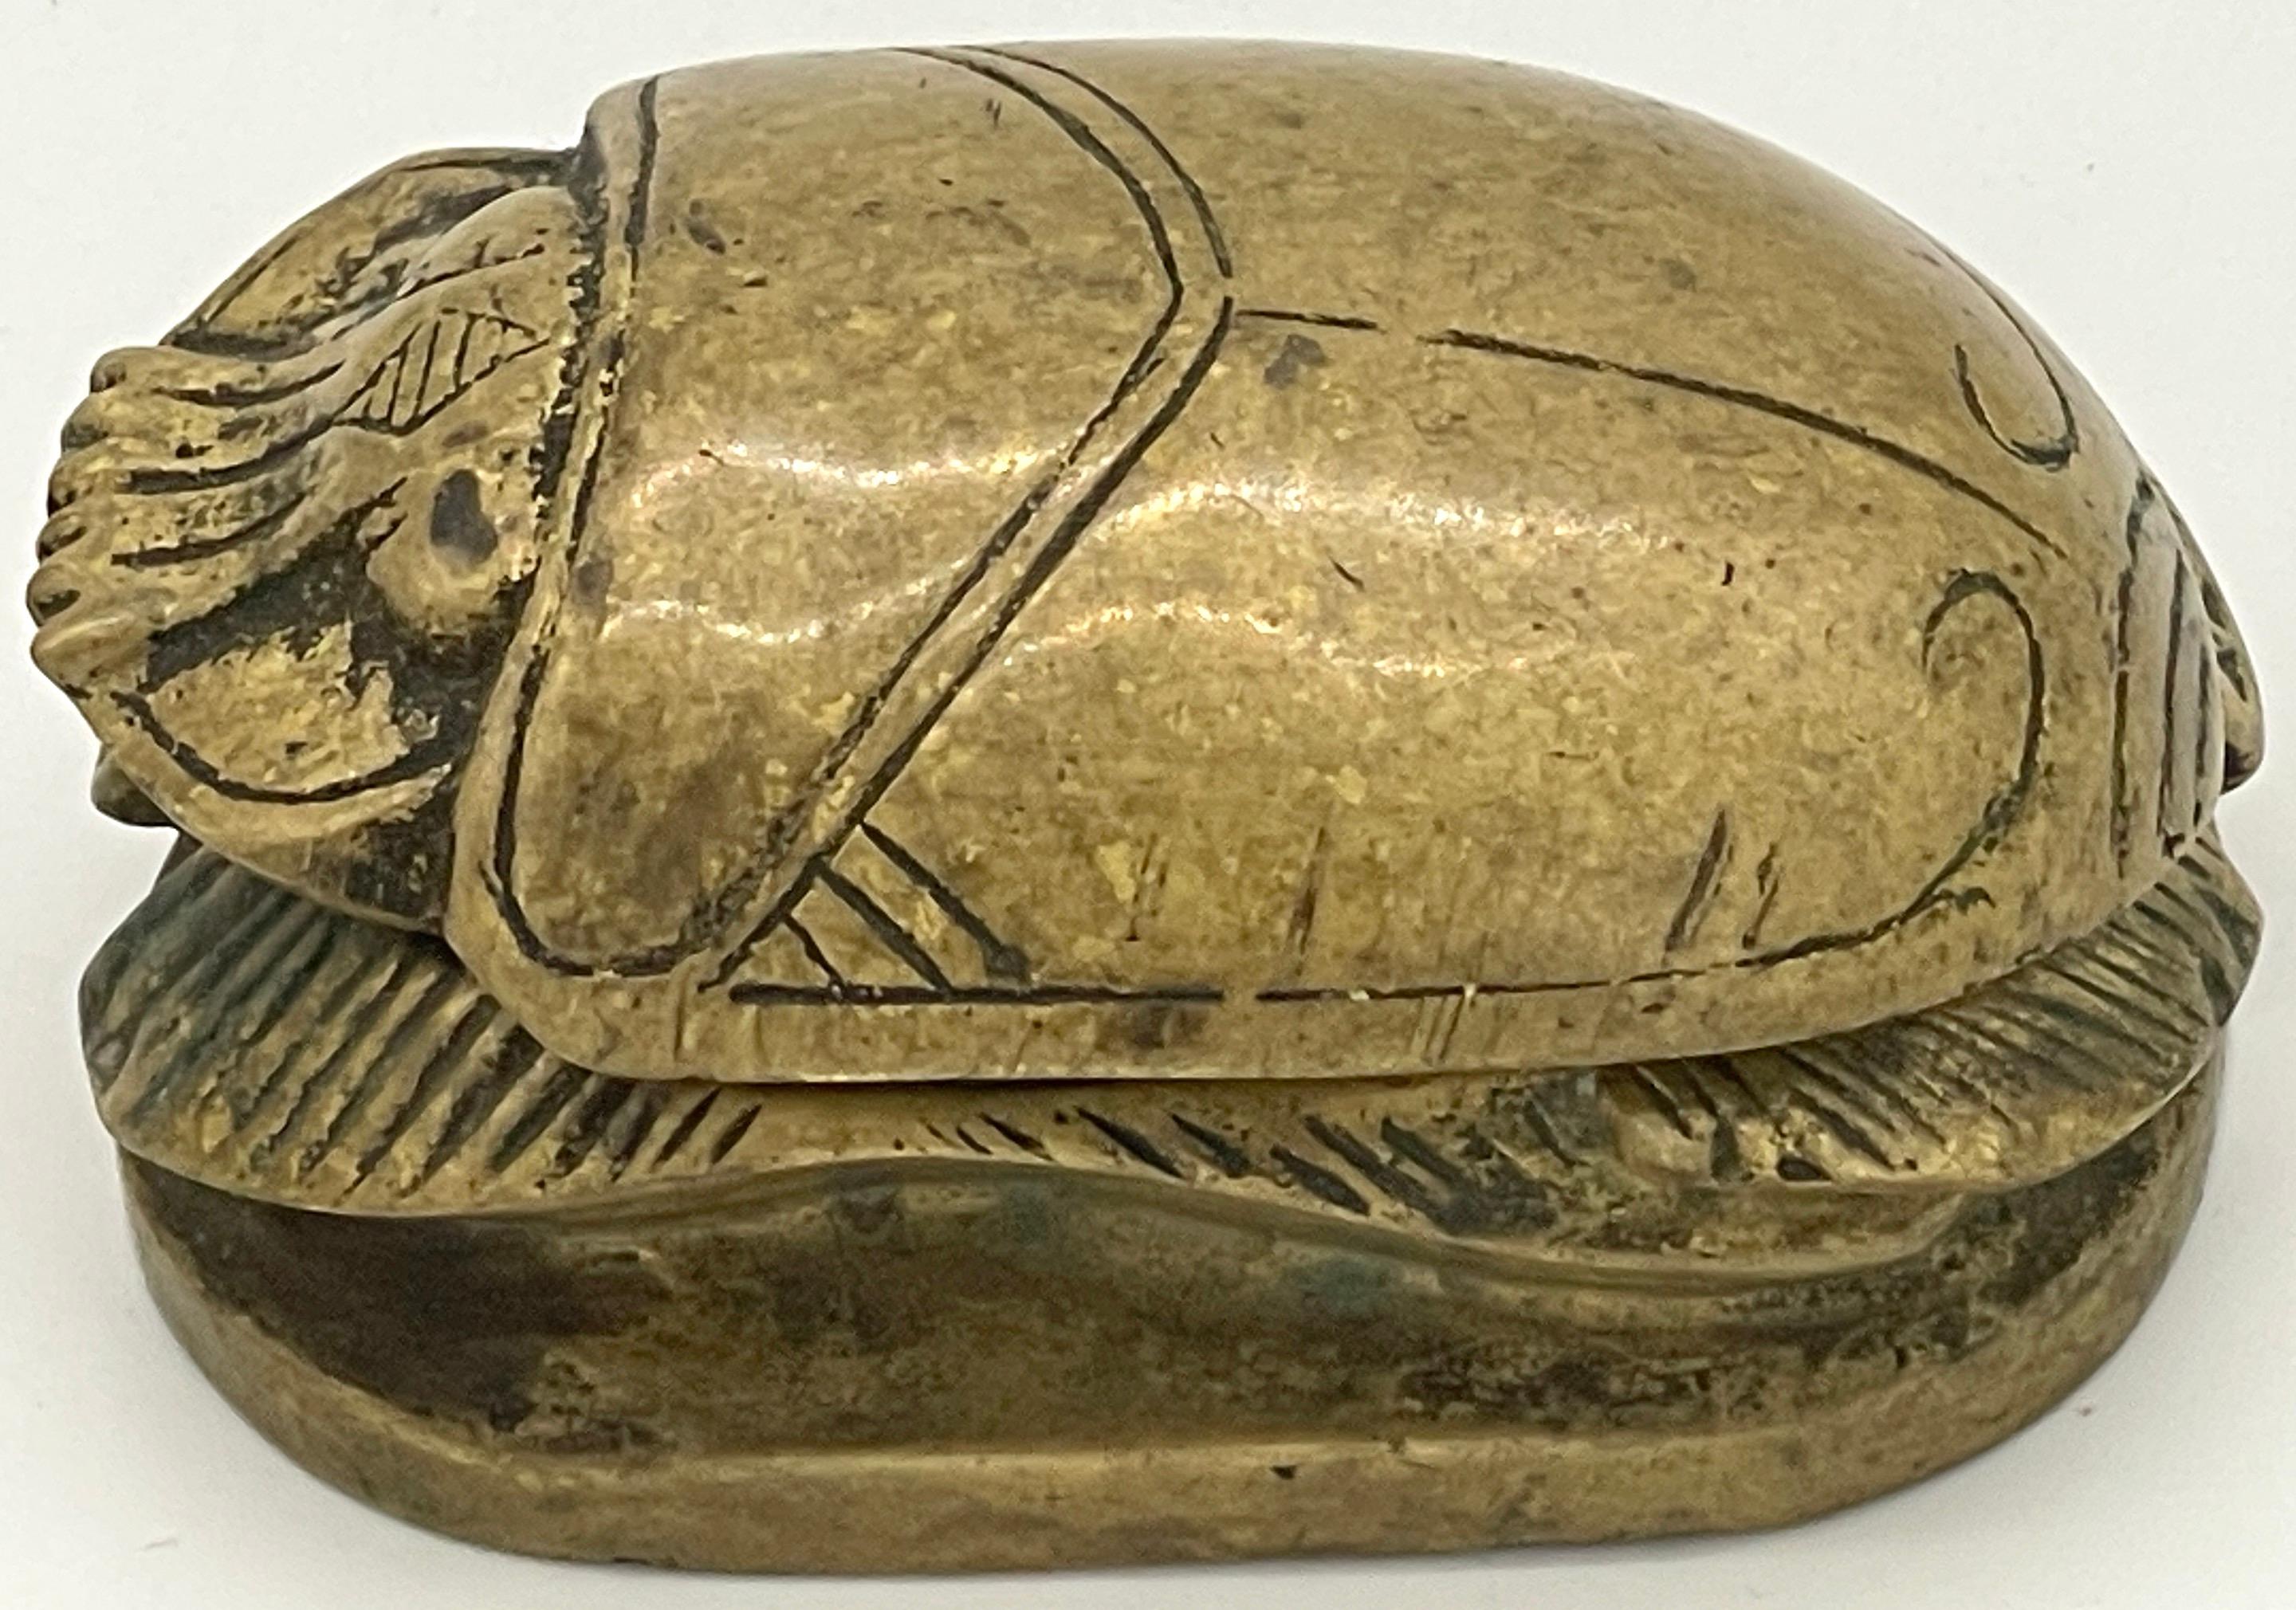 French Art Deco Egyptian Revival Bronze Scarab Box, with Hieroglyphs
France, circa 1930s

A captivating French Art Deco Egyptian Revival Bronze Scarab Box, made in France during the 1930s. This exquisite box draws inspiration from the ancient